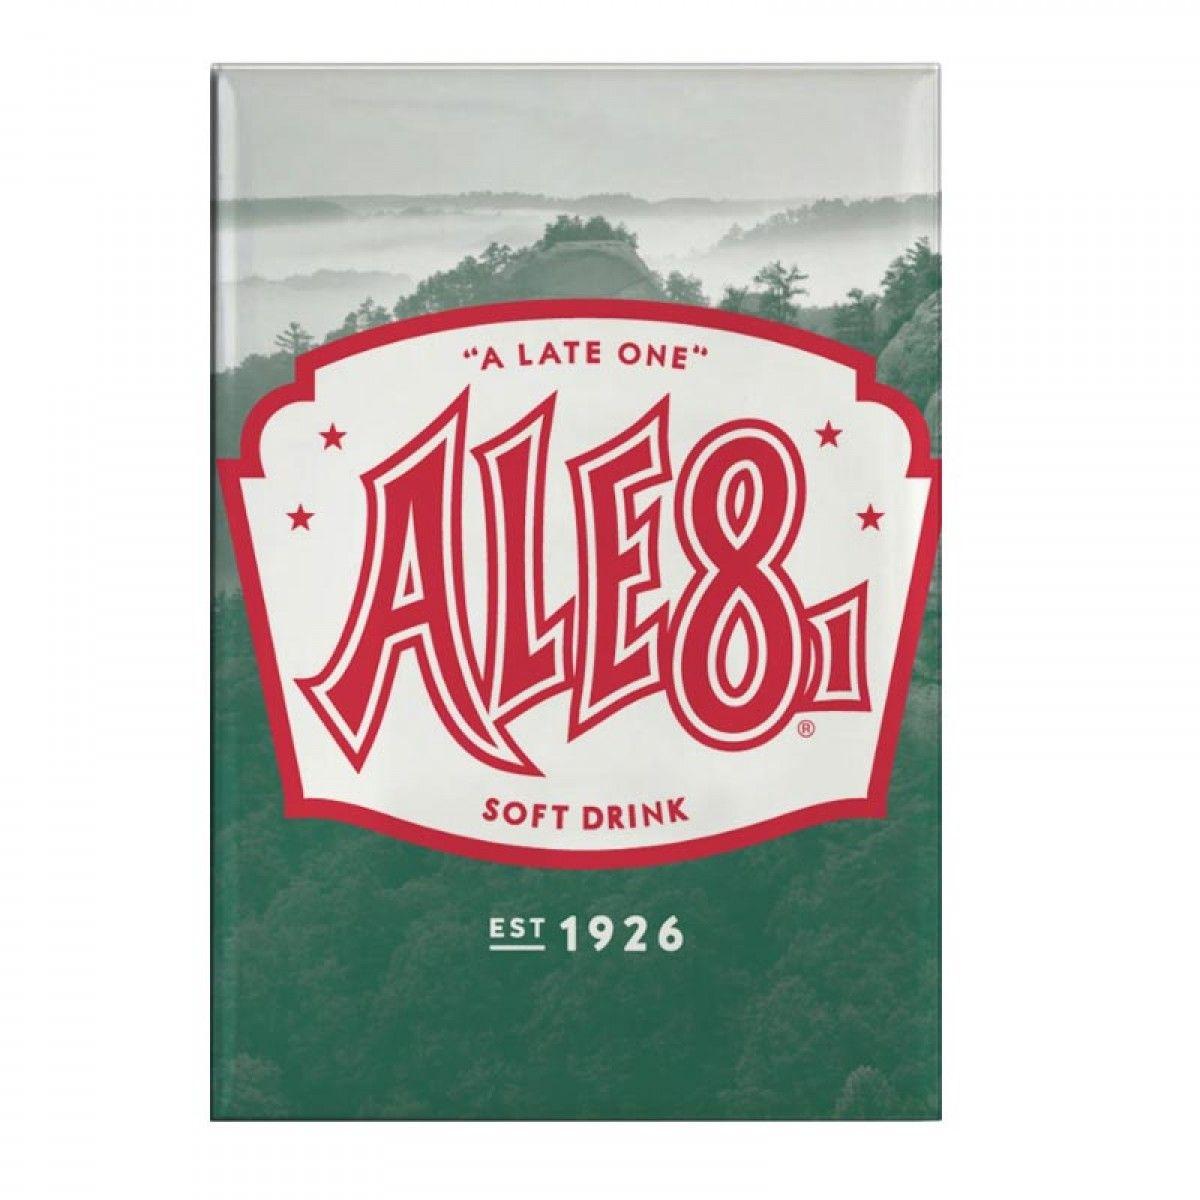 Ale 8 Logo - Ale-8-One Red River Gorge Magnet | Ale-8-One